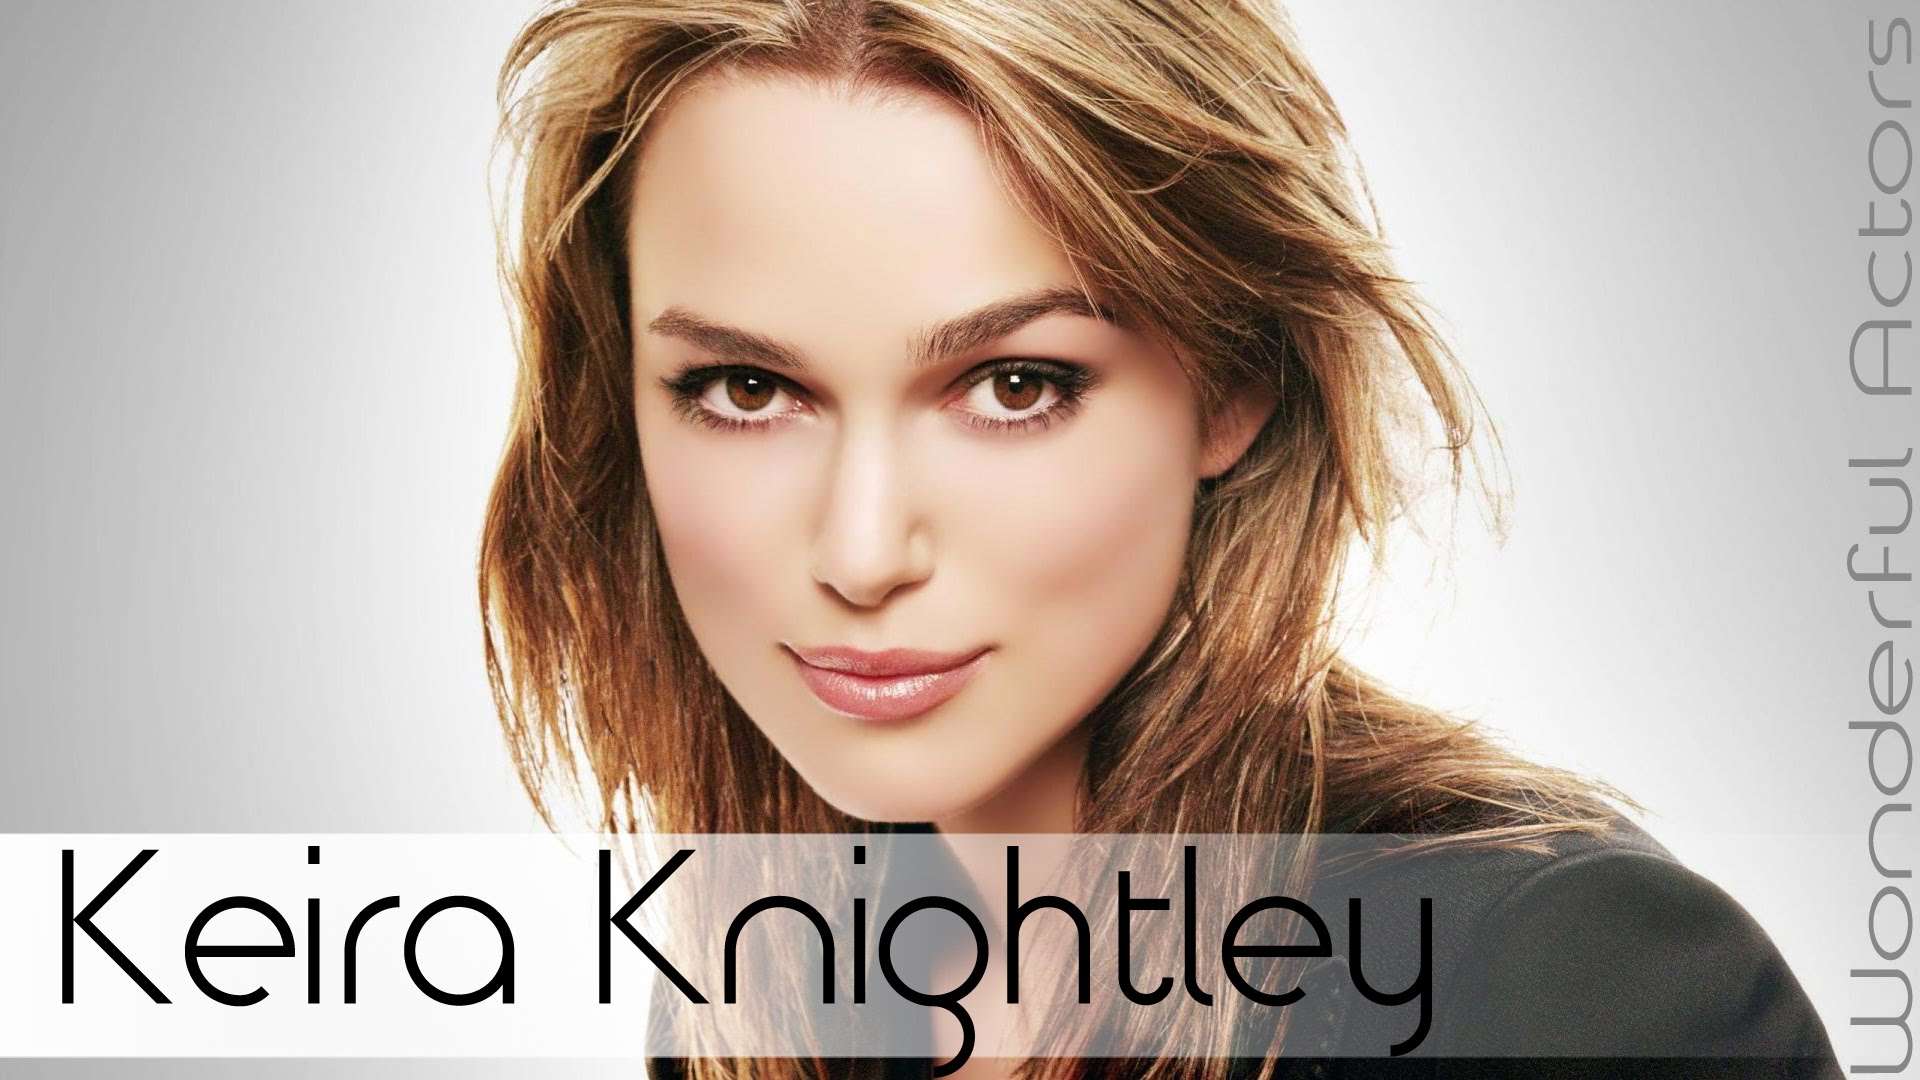 Keira Knightley Nude Is Amazing You Have To See This Pics